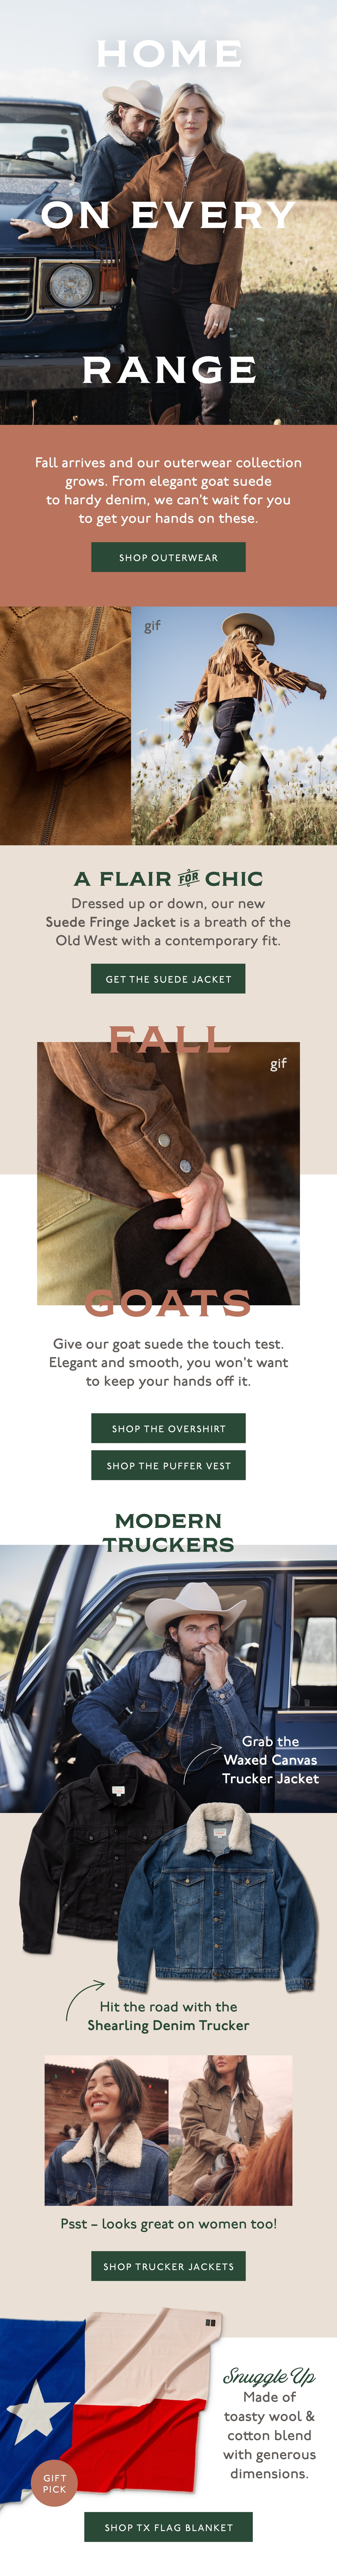 Tecovas-Outerwear-Email-Overview.jpg